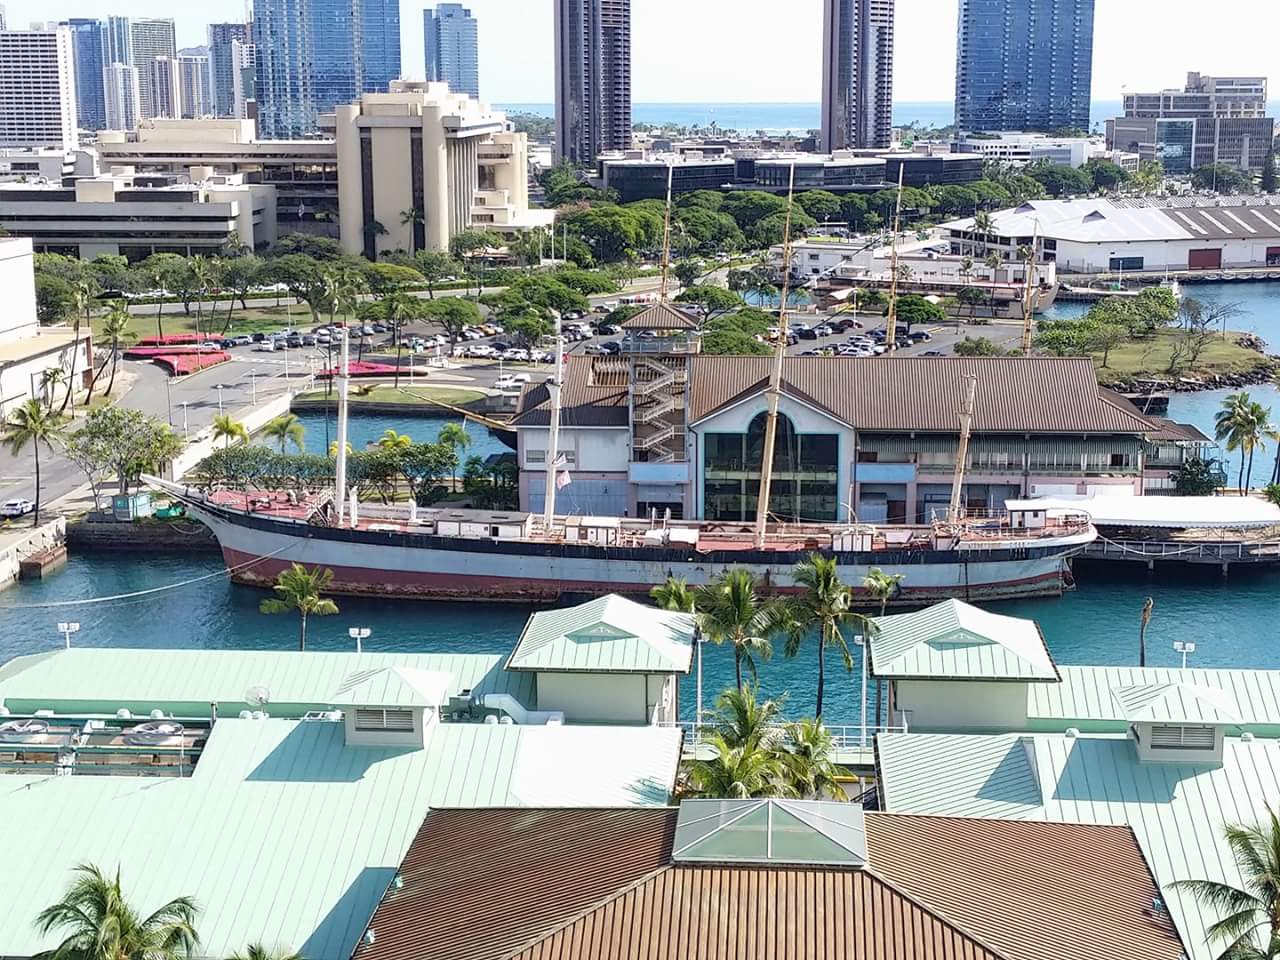 The Falls of Clyde in her current home, Honolulu